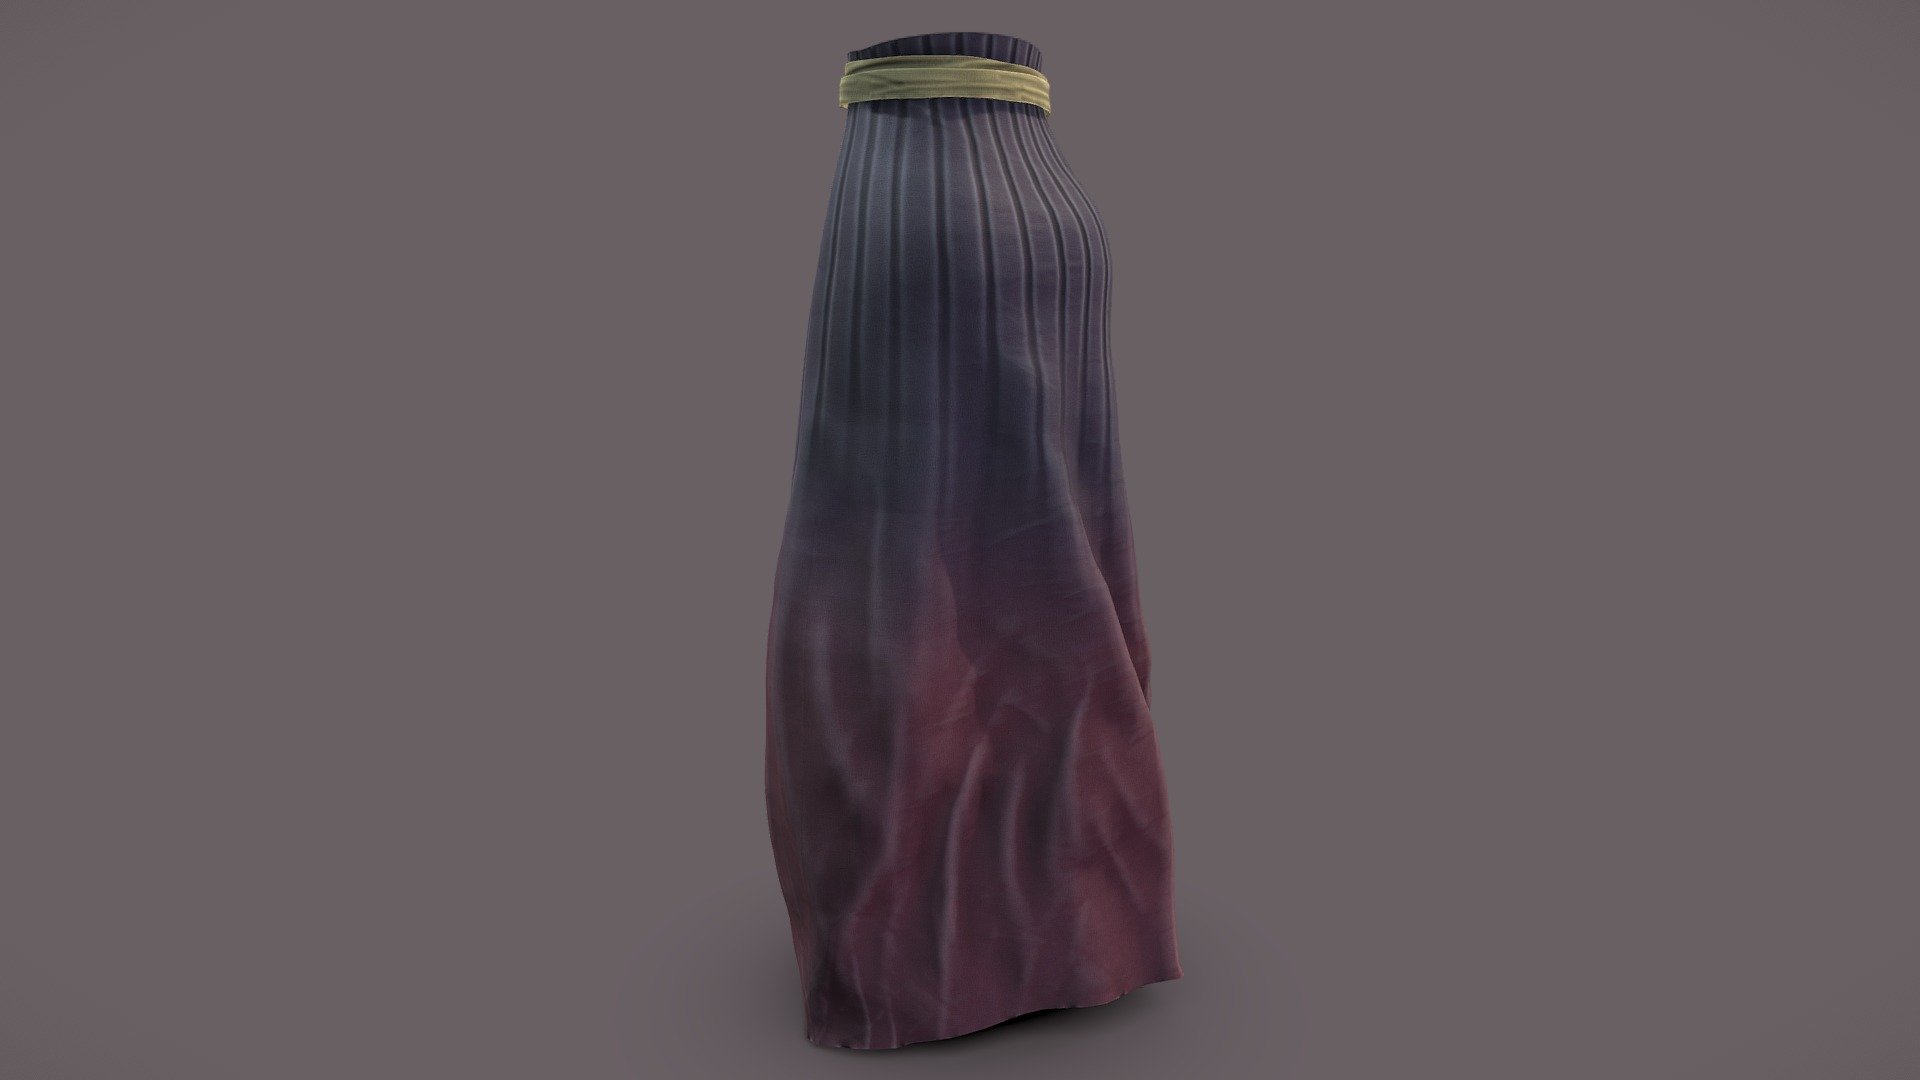 Female Traditional Chinese Japanese Long Maxi Skirt With Ribbon Belt

Can be fitted to any character

Clean topology

No overlapping smart optimized unwrapped UVs

High-quality realistic textures

FBX, OBJ, gITF, USDZ (request other formats)

PBR or Classic

Type     user:3dia &ldquo;search term